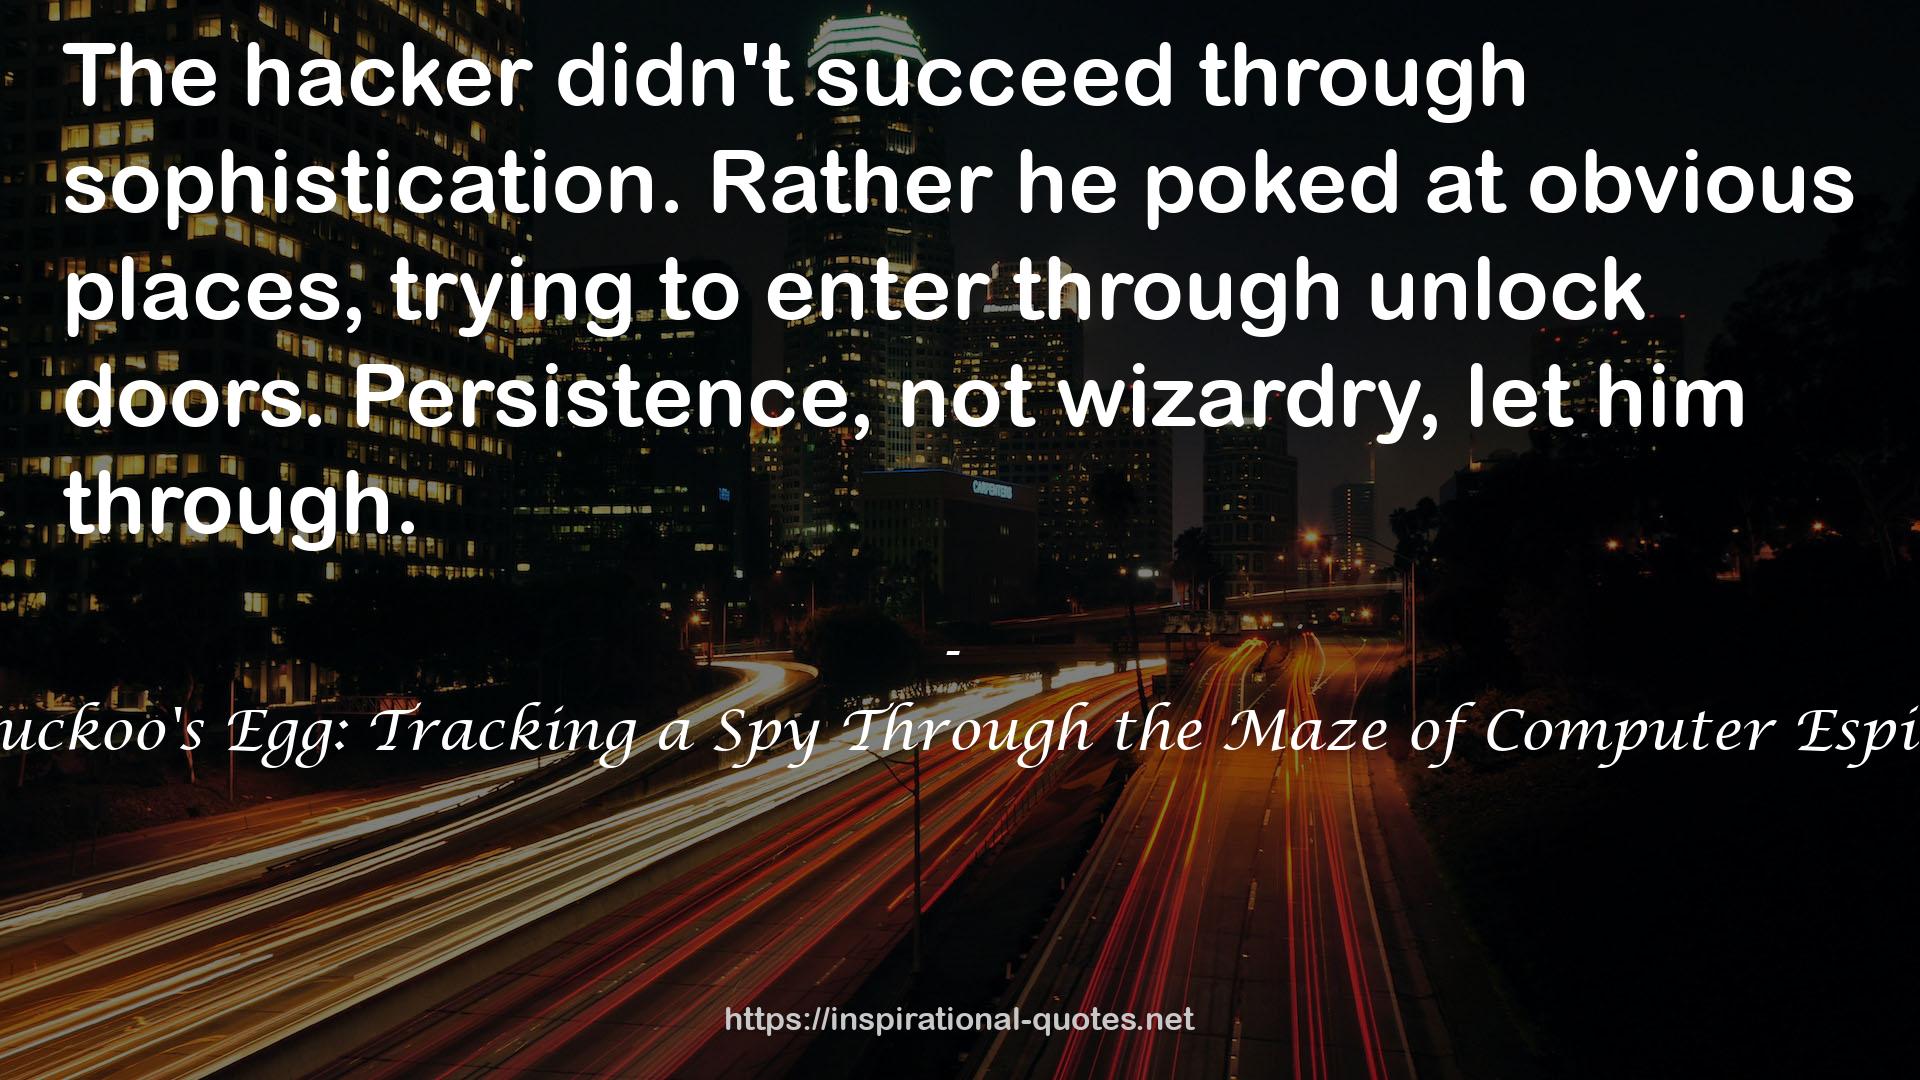 The Cuckoo's Egg: Tracking a Spy Through the Maze of Computer Espionage QUOTES